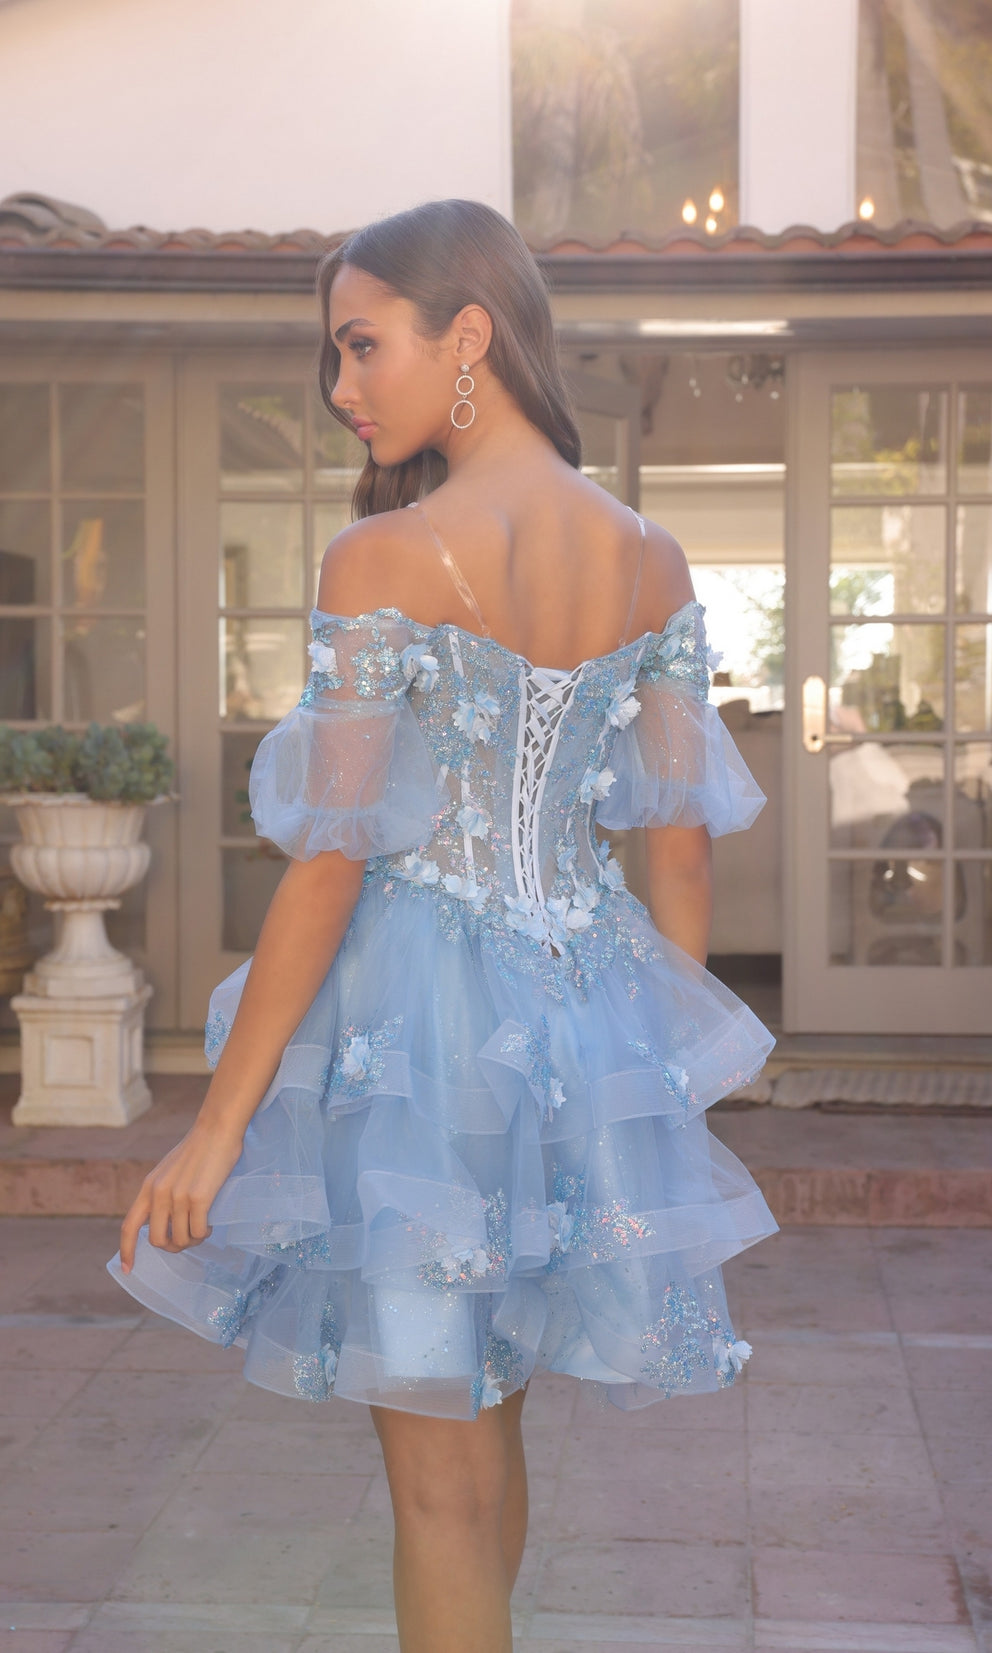 AURIELIE Pink 3D Floral Convertible Tulle Layered Oversize Ball Gown School Formal & Prom Dress